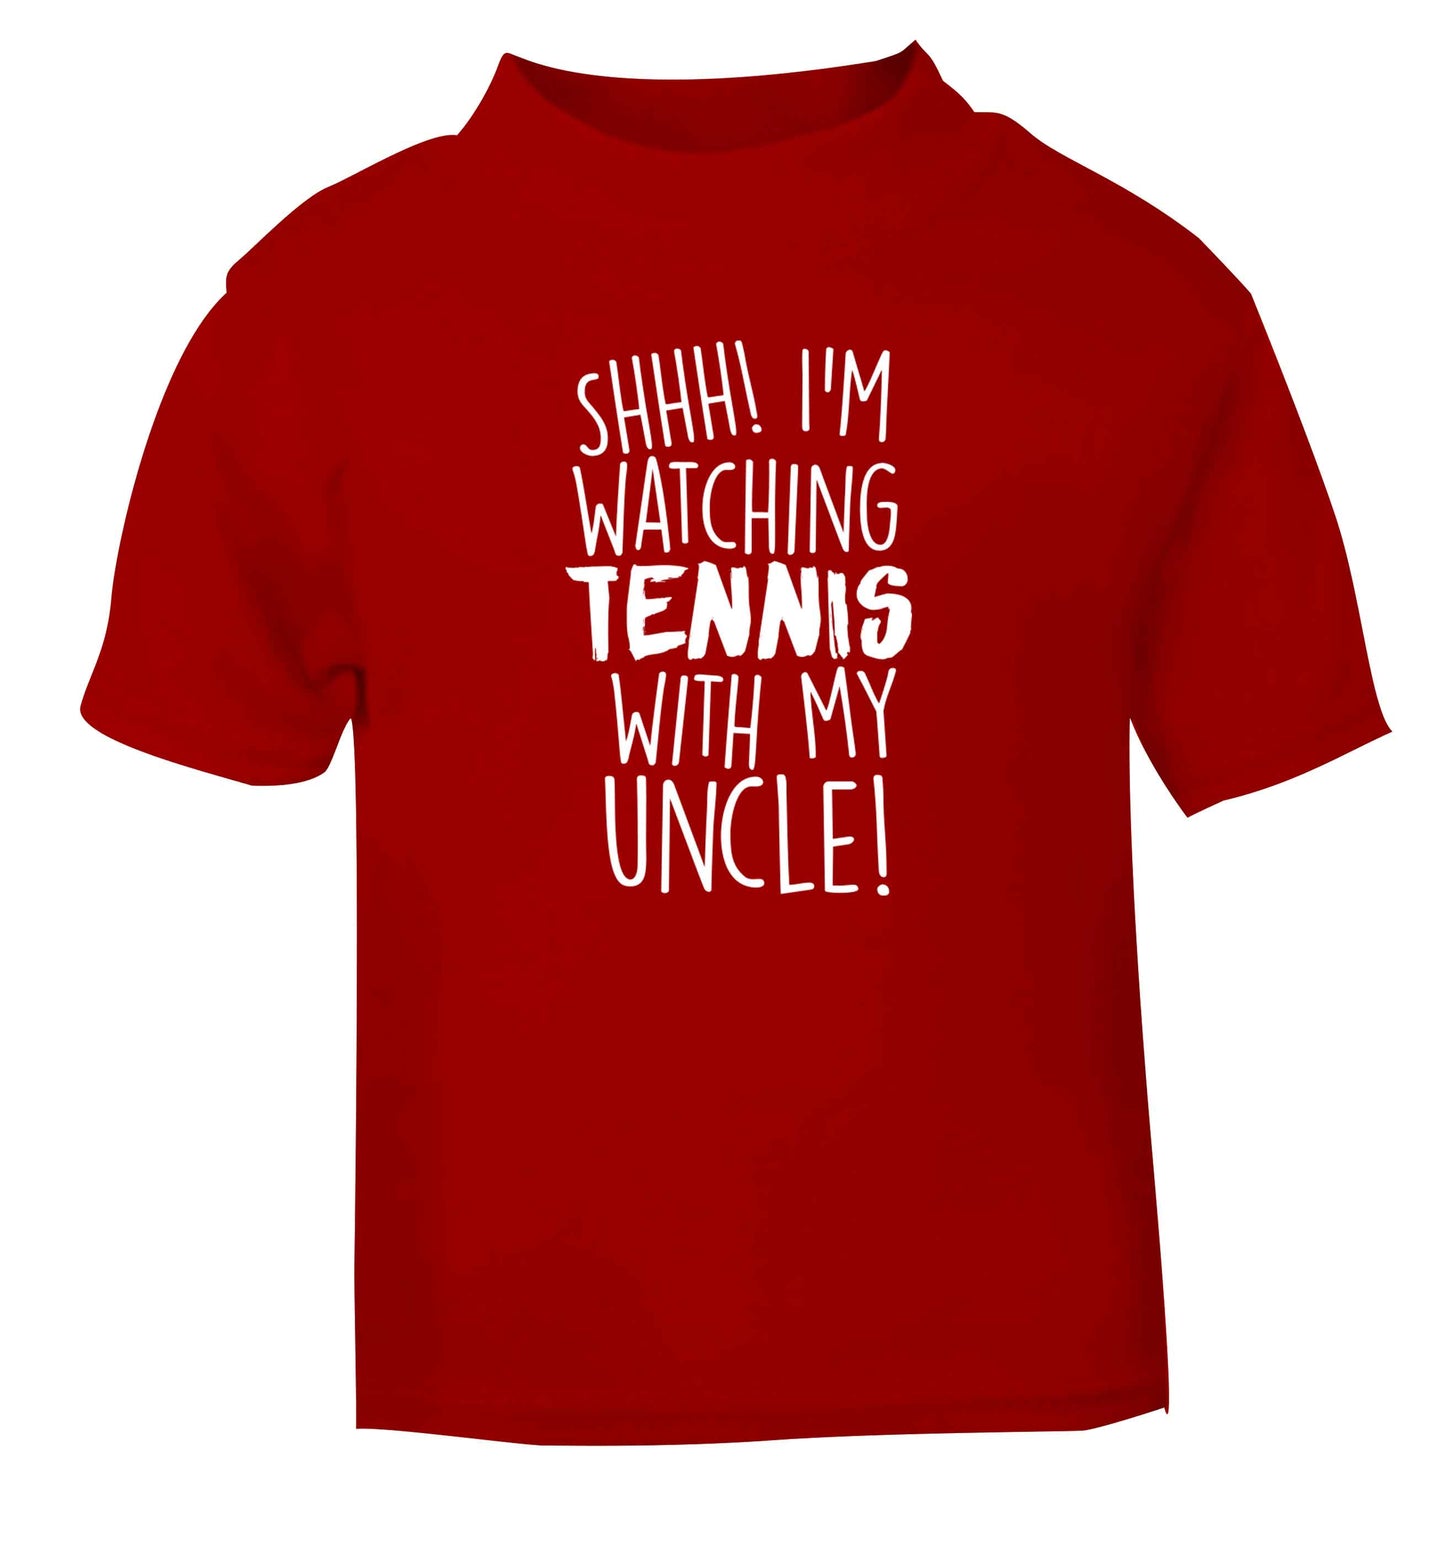 Shh! I'm watching tennis with my uncle! red Baby Toddler Tshirt 2 Years